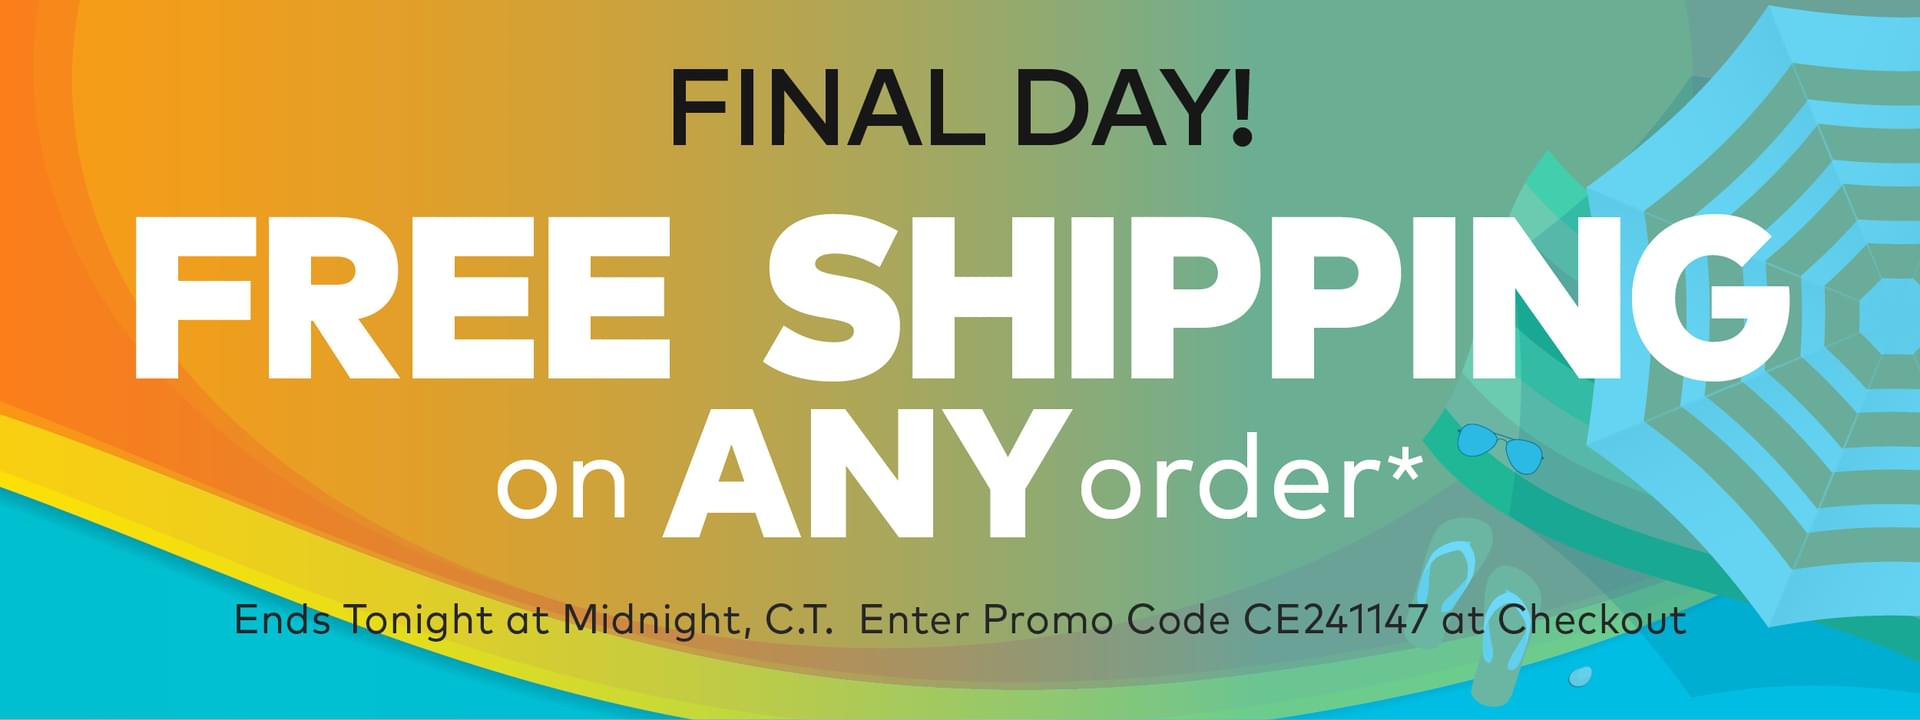 Final Day! Free Shipping on ANY Order!*